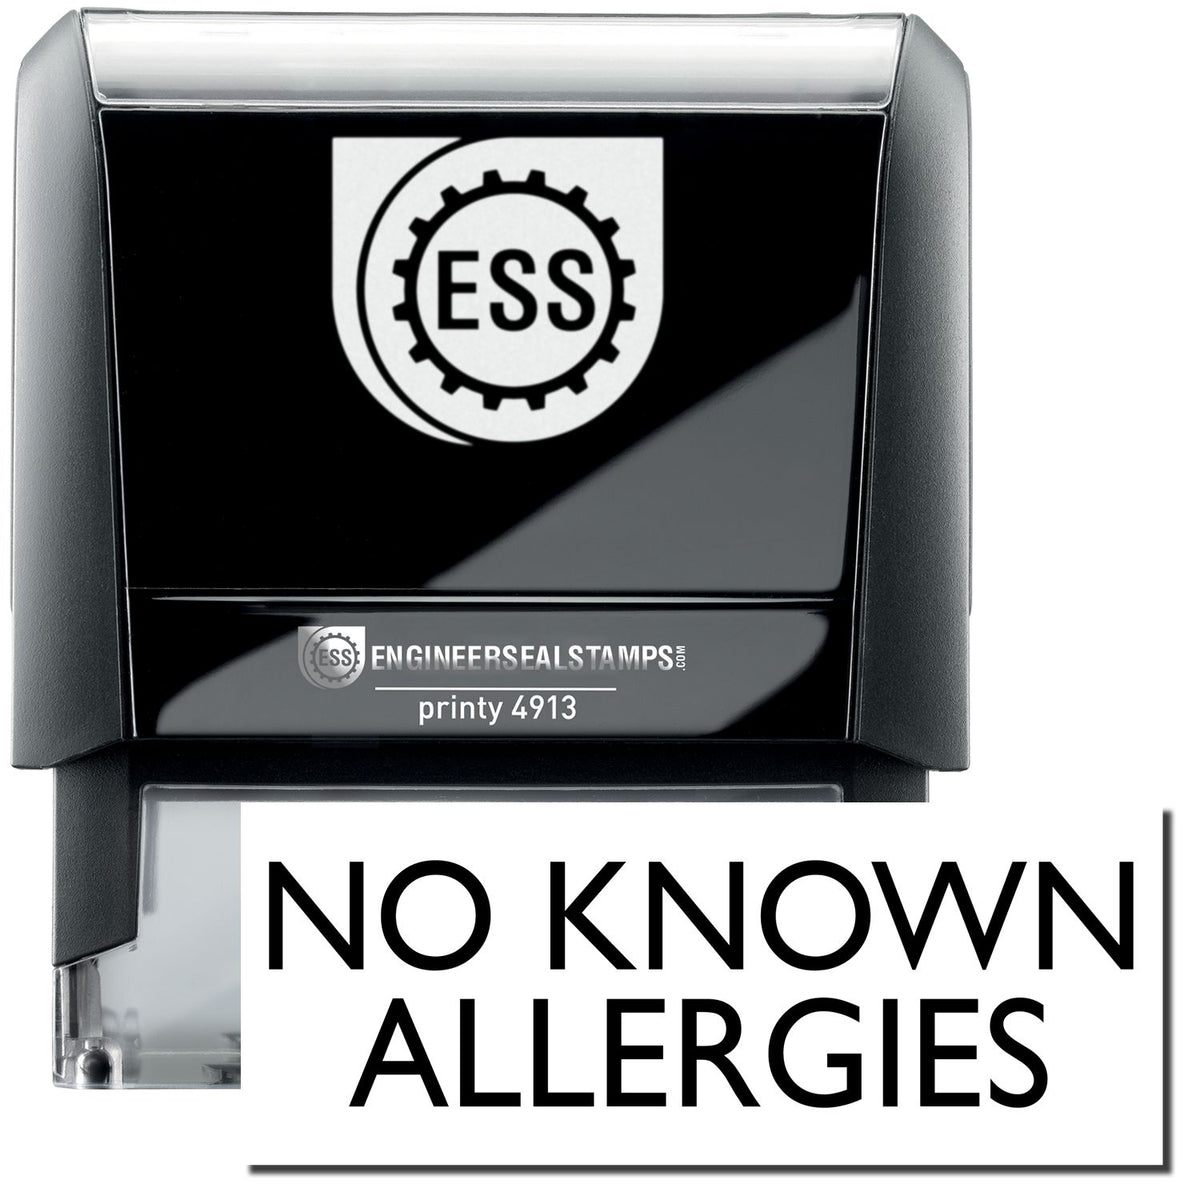 A self-inking stamp with a stamped image showing how the text &quot;NO KNOWN ALLERGIES&quot; in a large bold font is displayed by it.